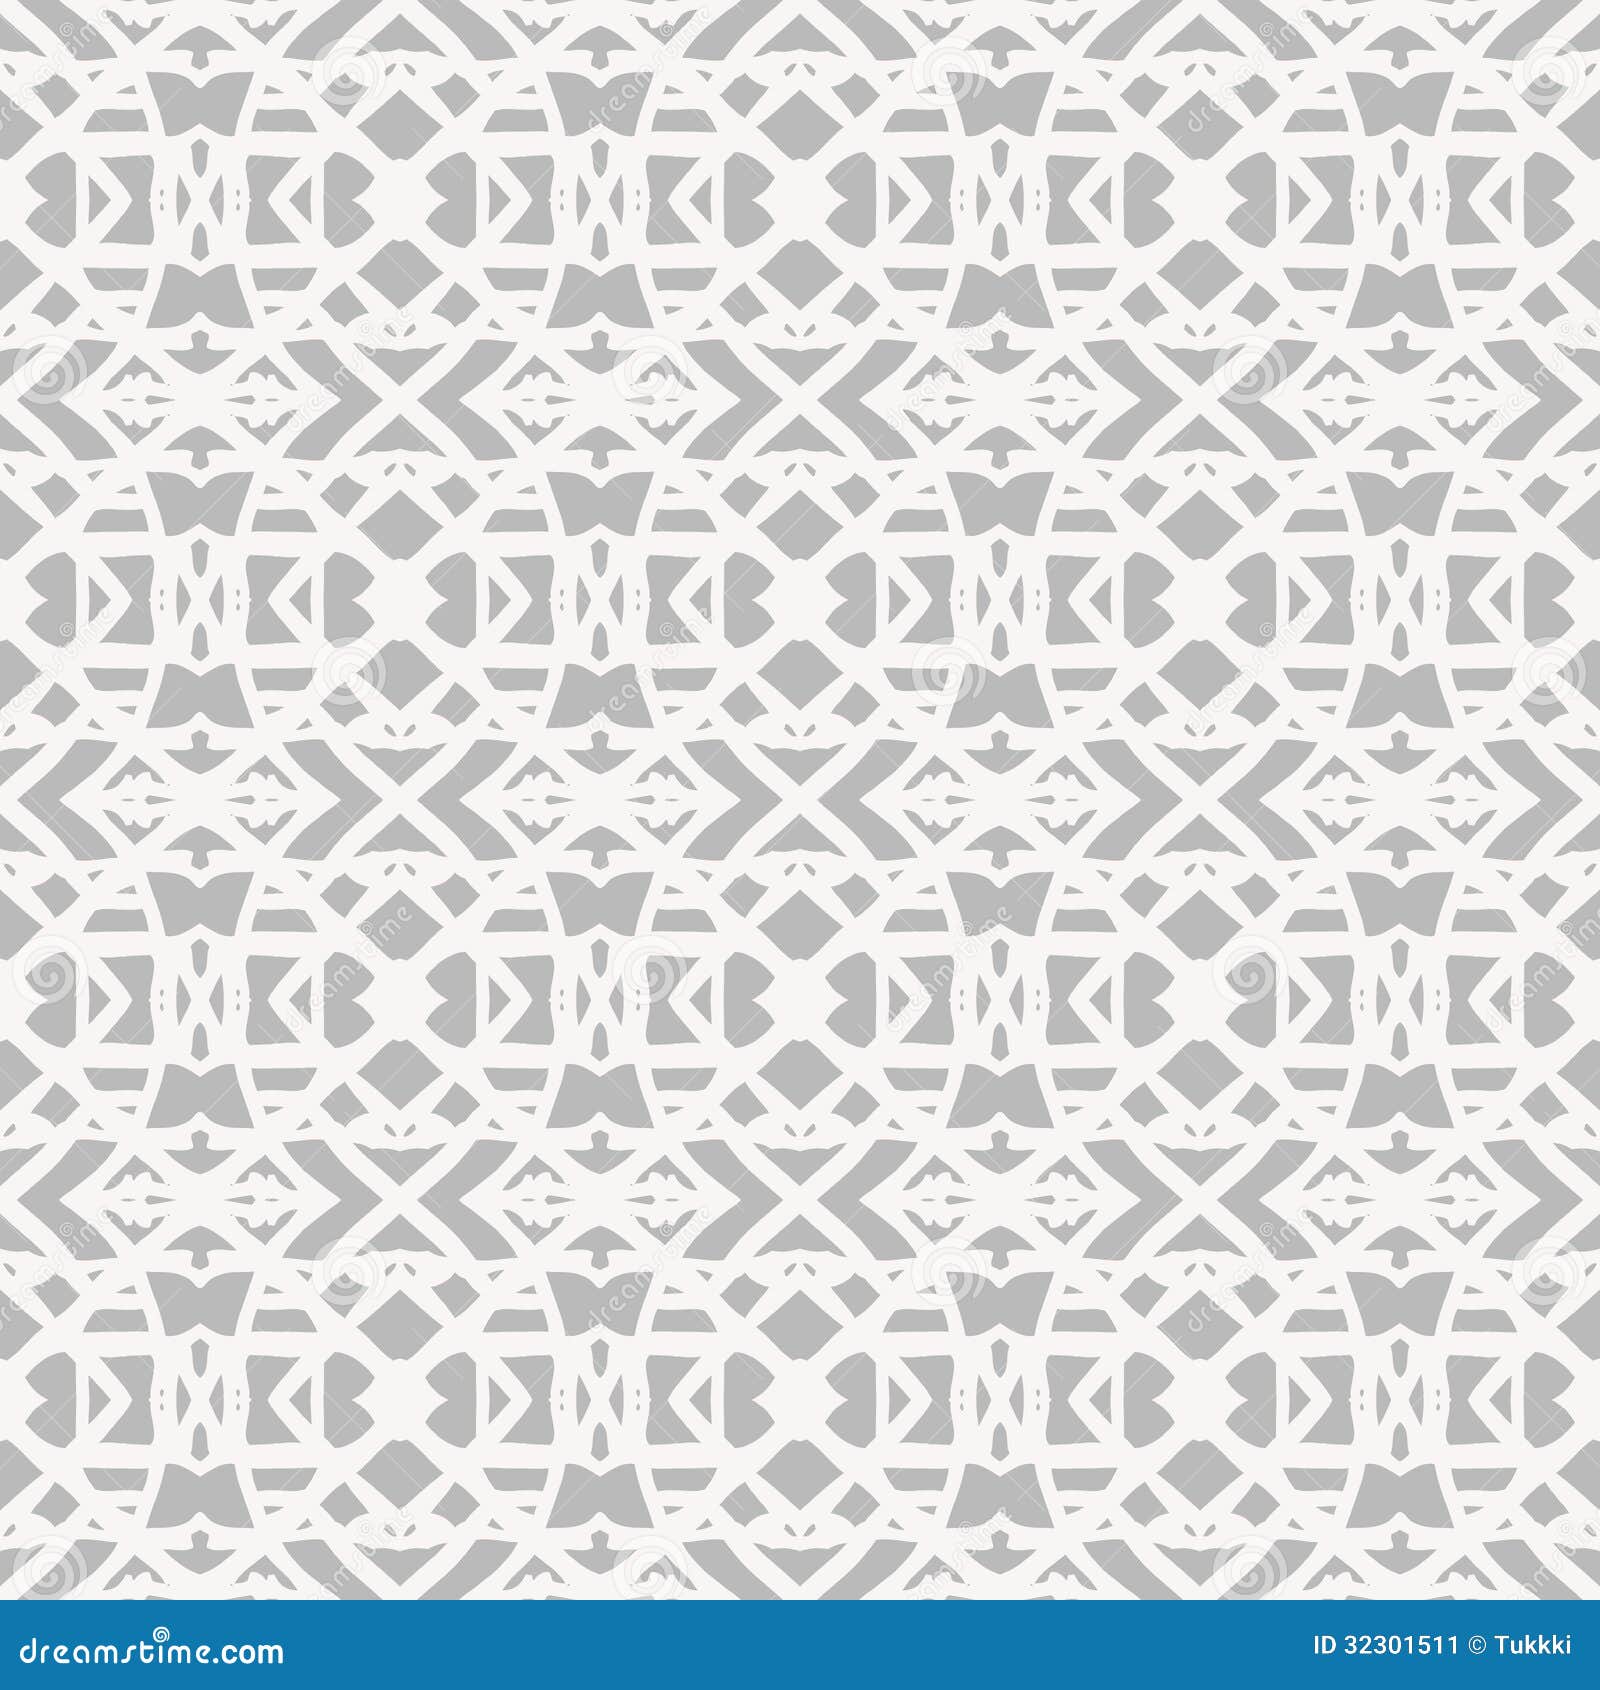 Lace Pattern With White Shapes In Art Deco Style Stock Image ...